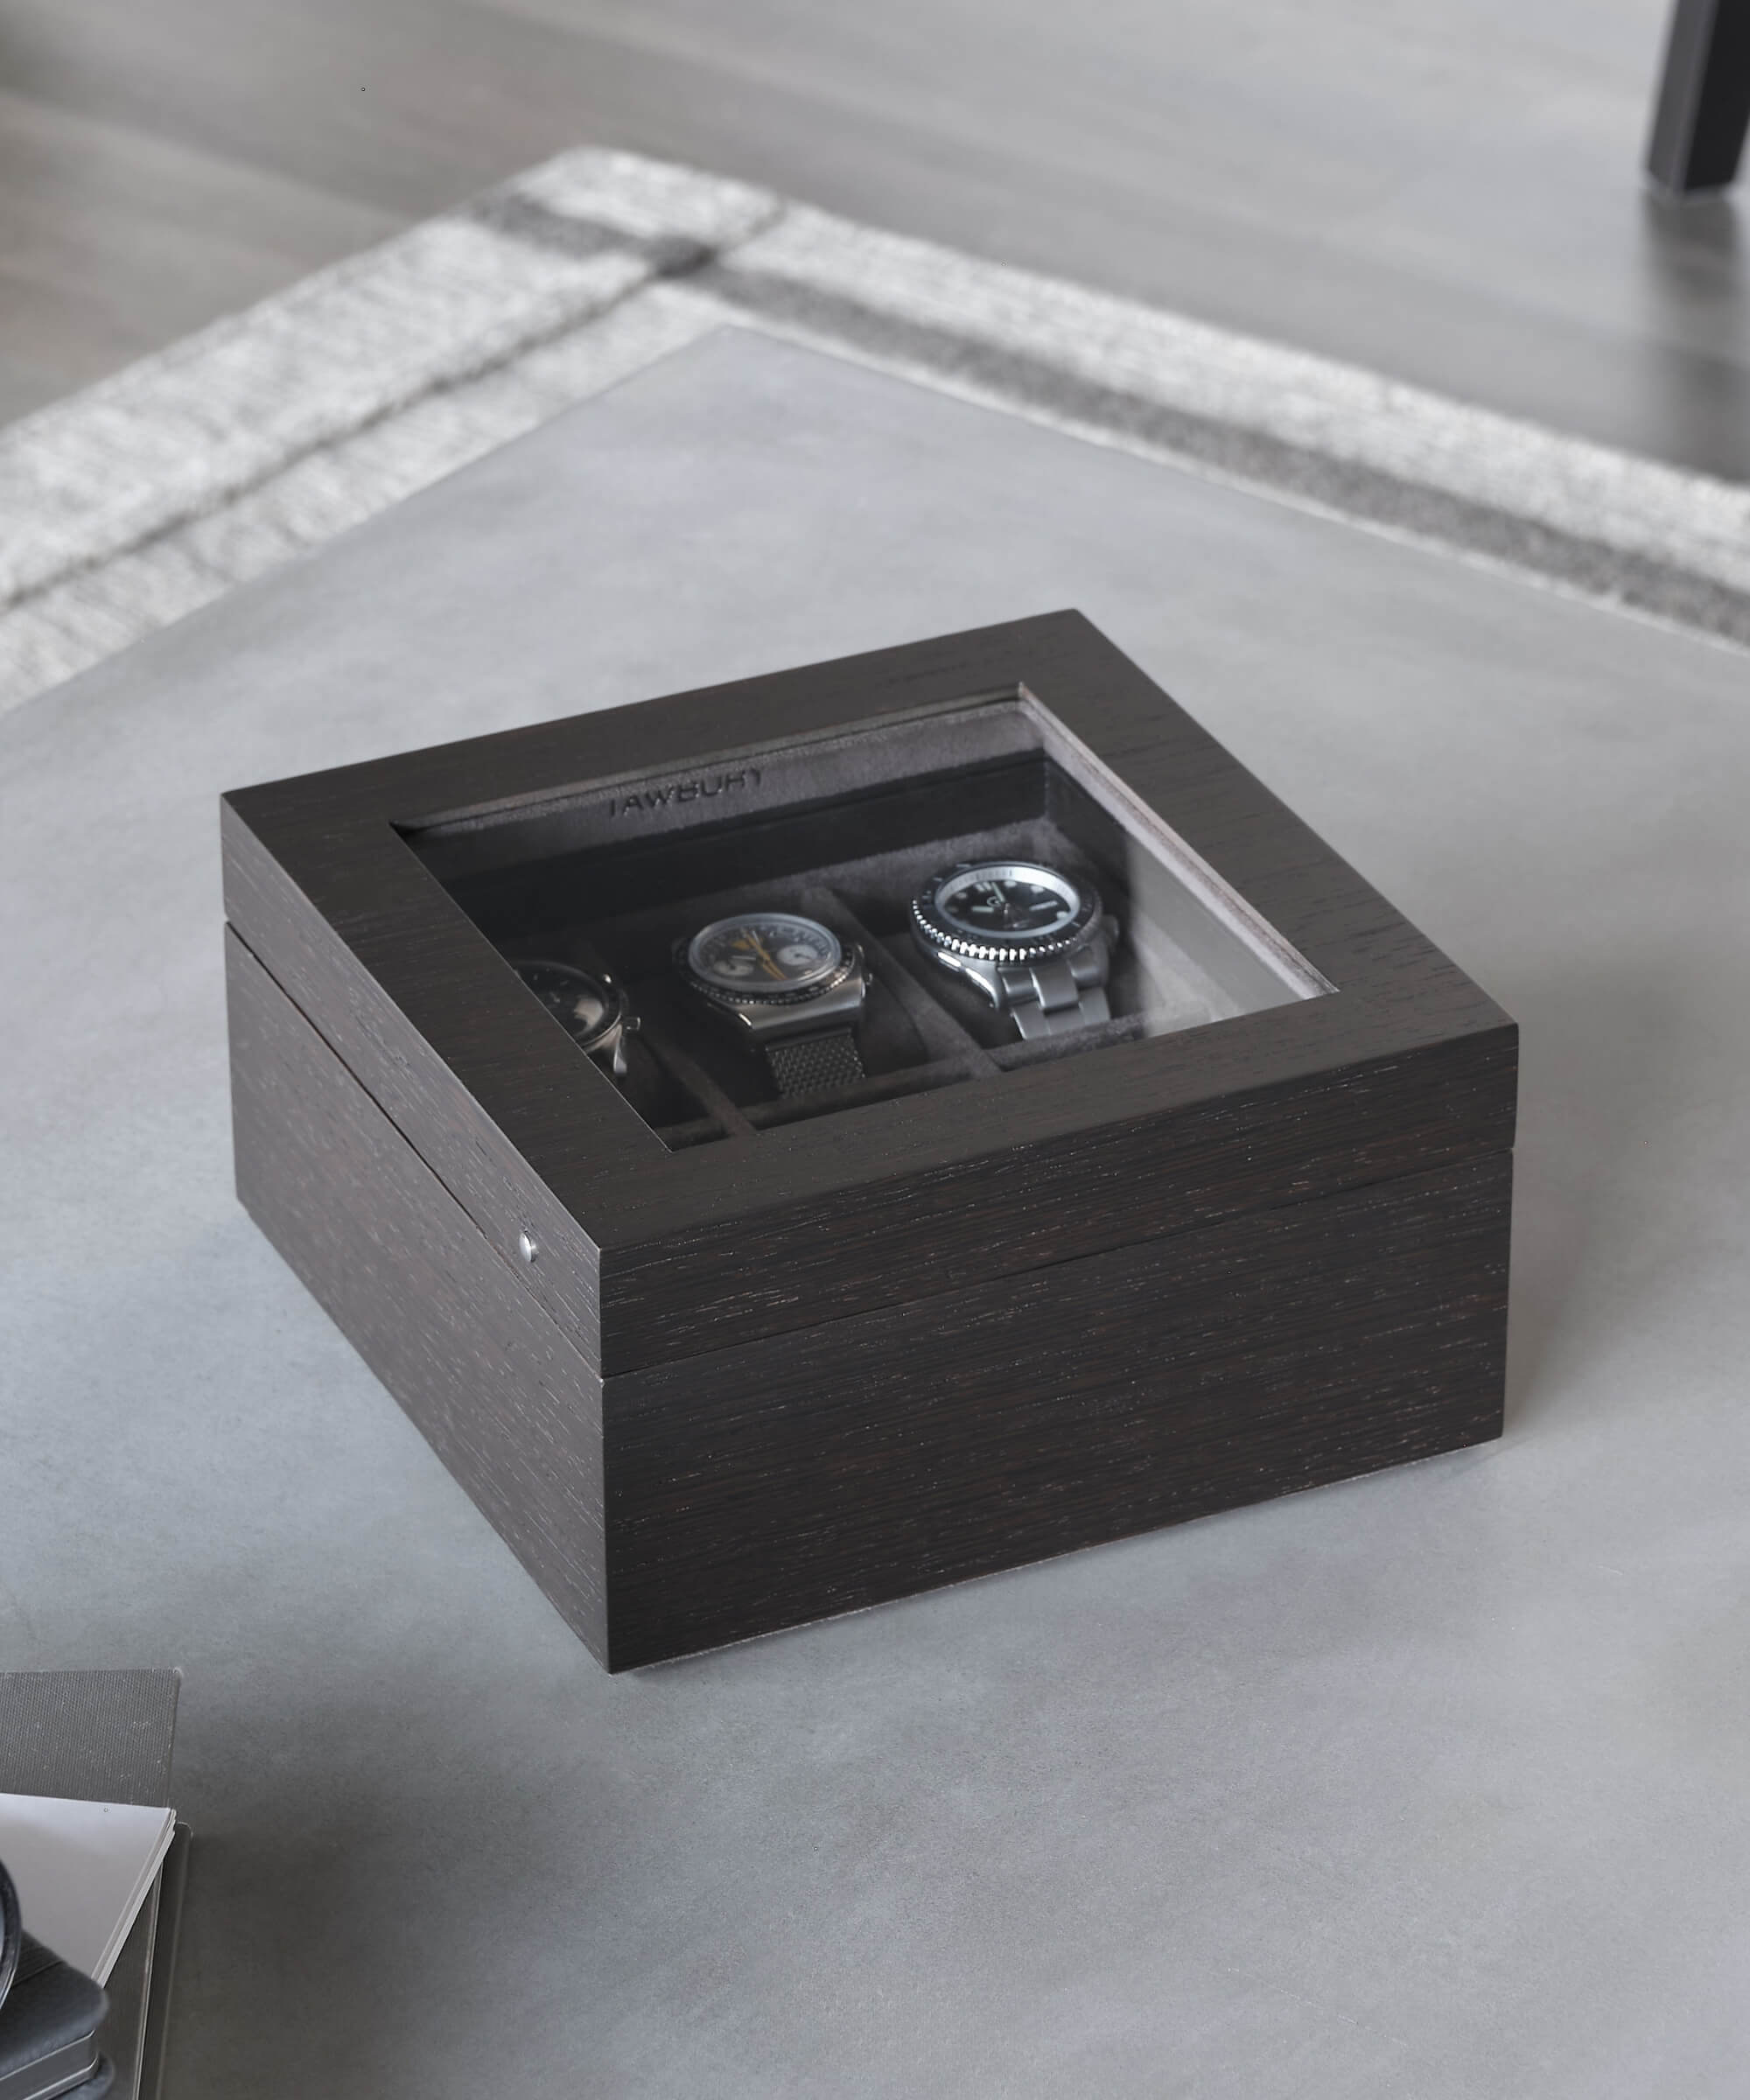 A TAWBURY Grove 6 Slot Watch Box with Glass Lid - Kassod on a table with two timepieces in it.